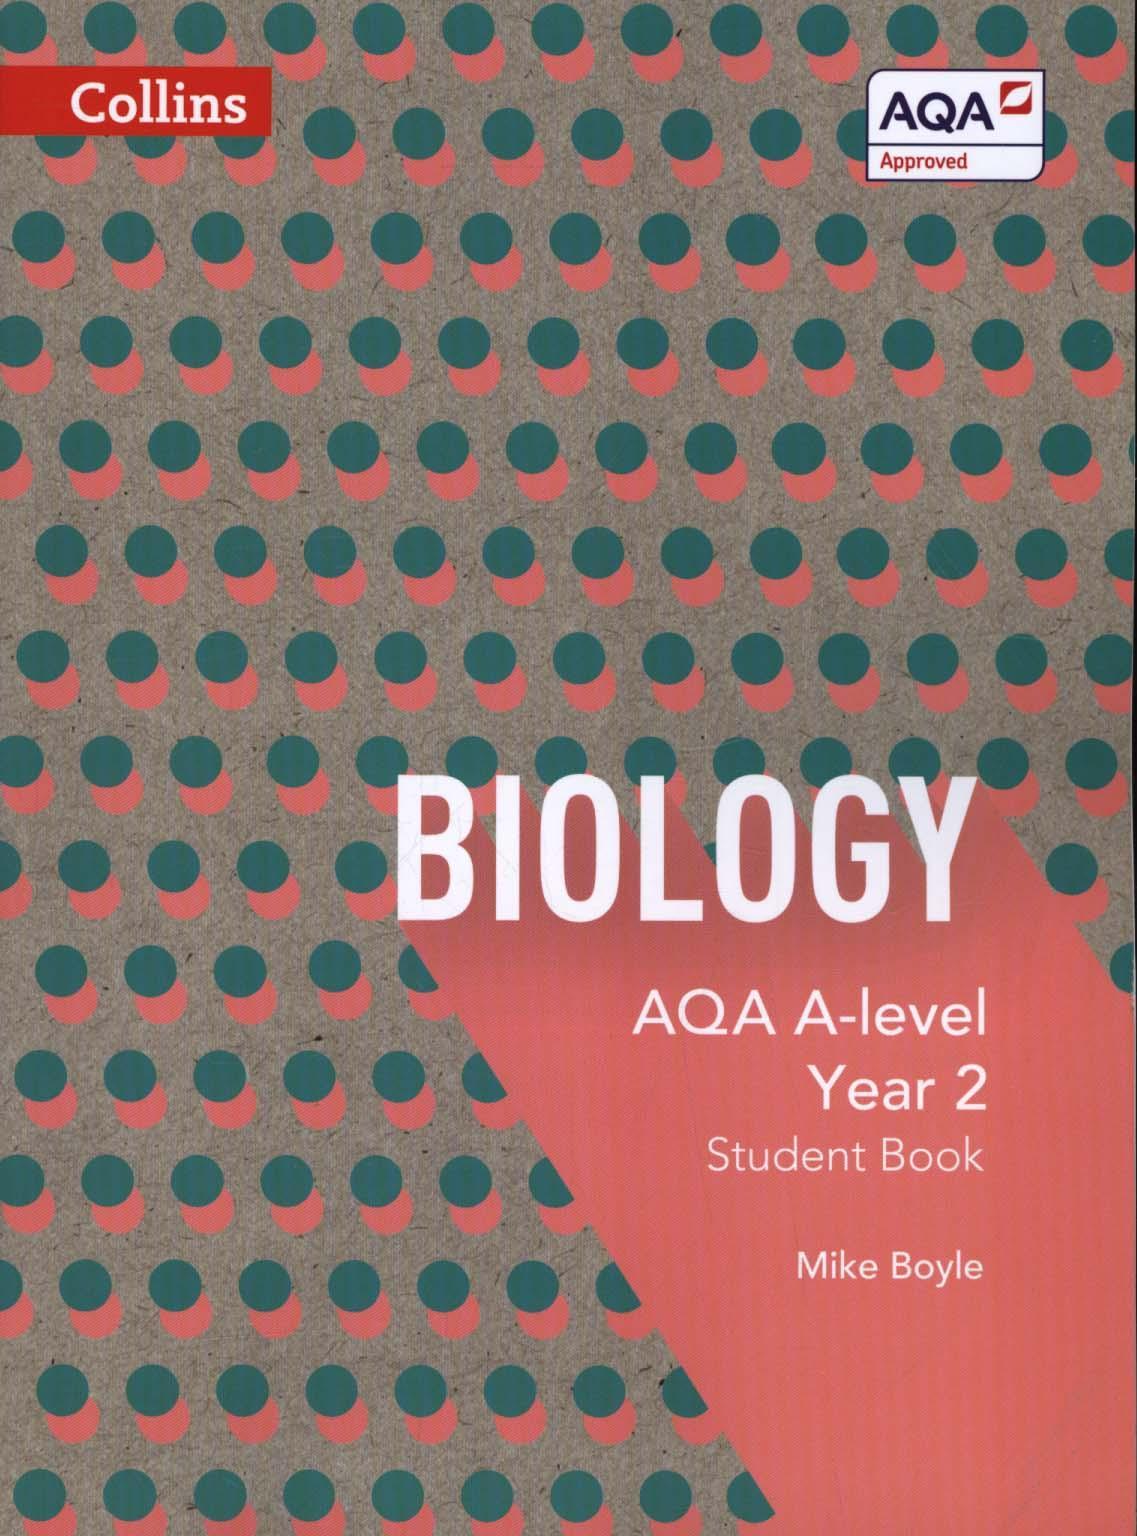 AQA A-Level Biology Year 2 Student Book